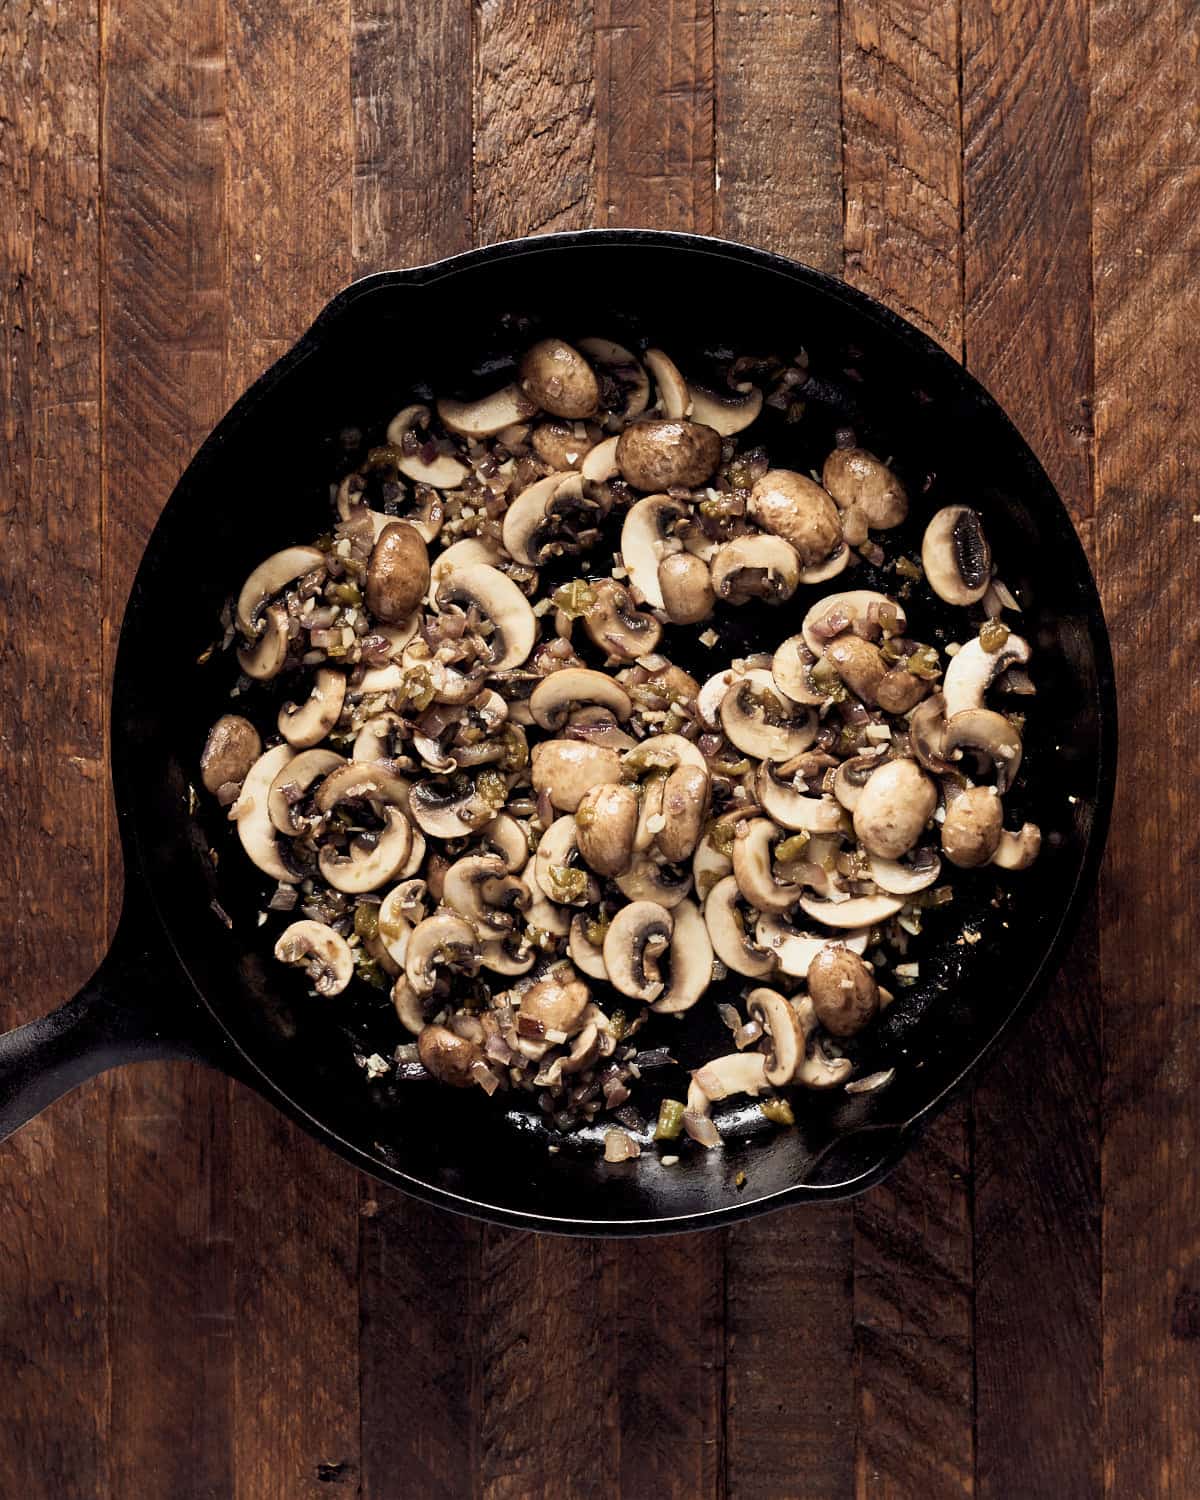 Cooking mushrooms with onions and garlic in cast iron pan on wood background